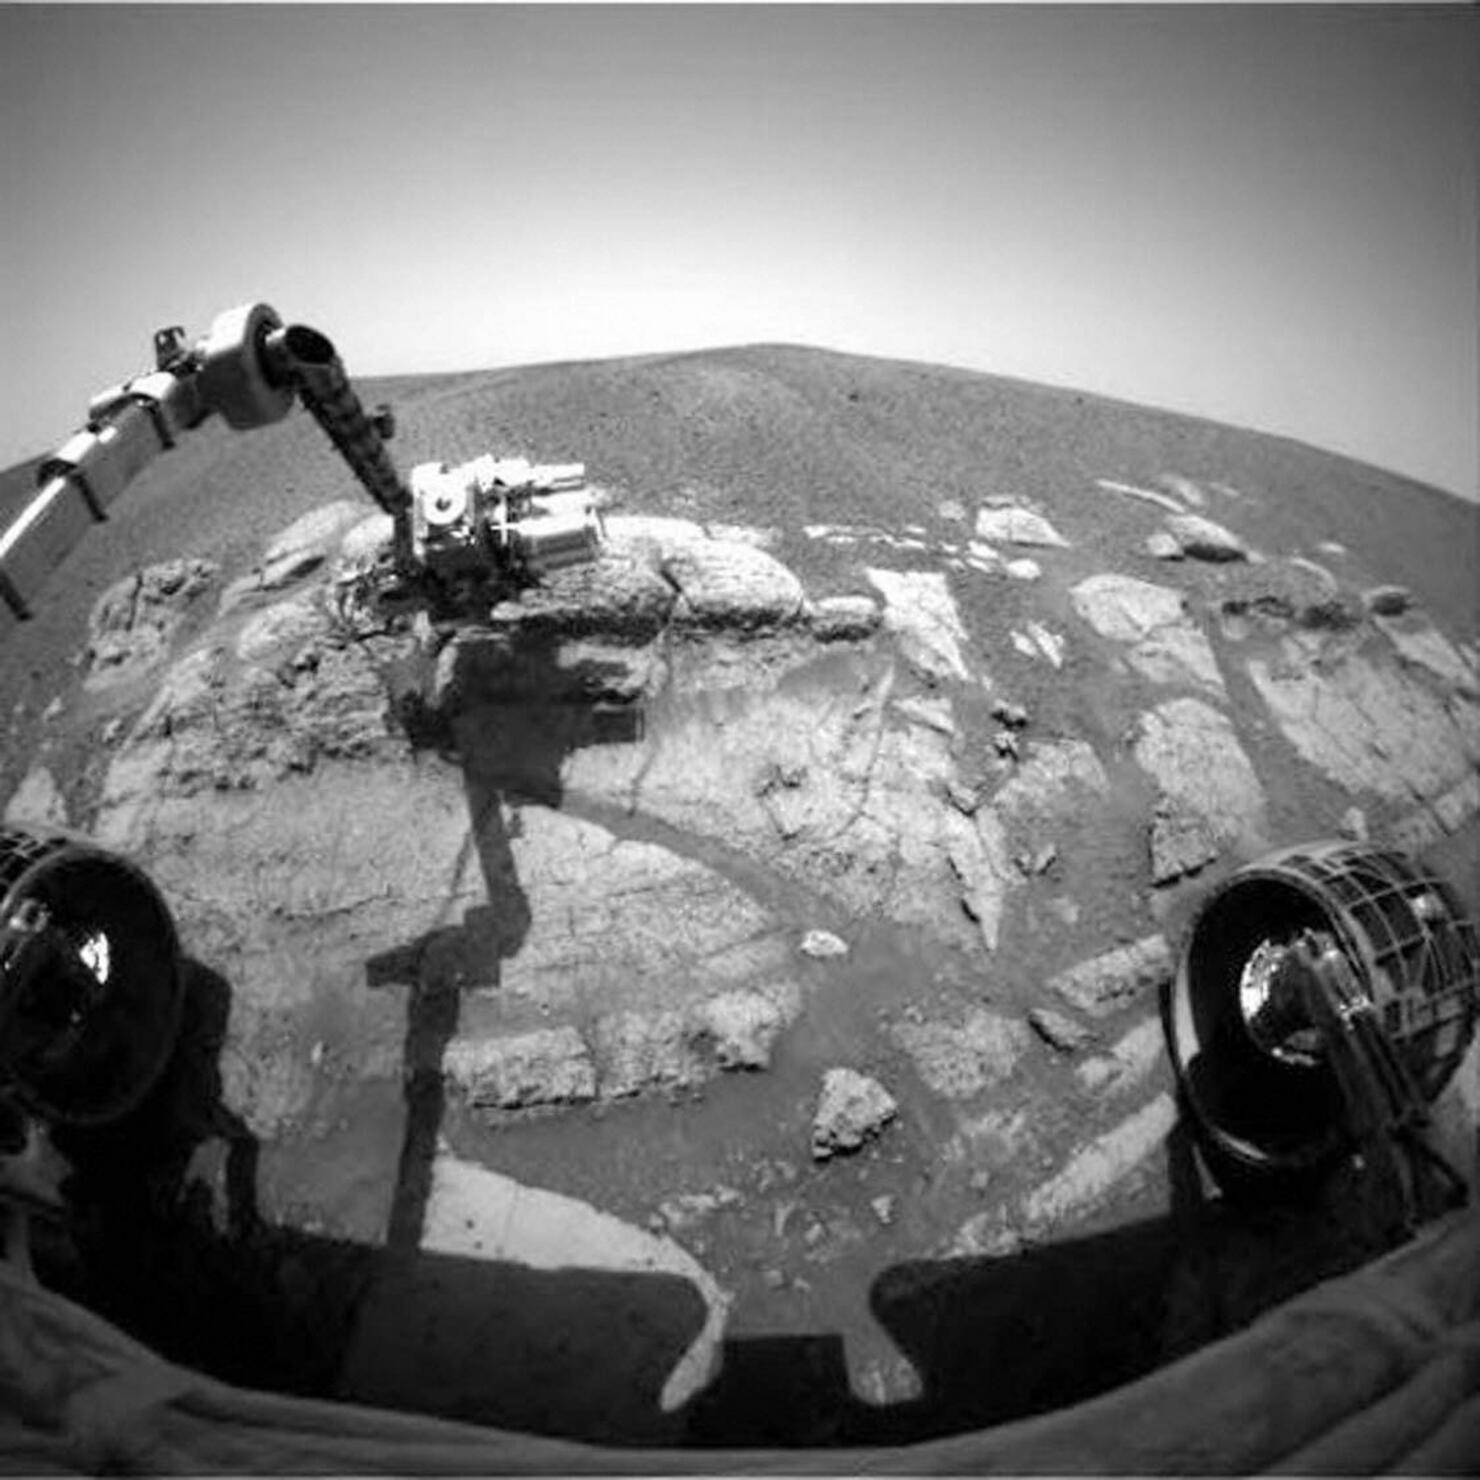 Opportunity Rover completes mission after 15 years on Red Planet